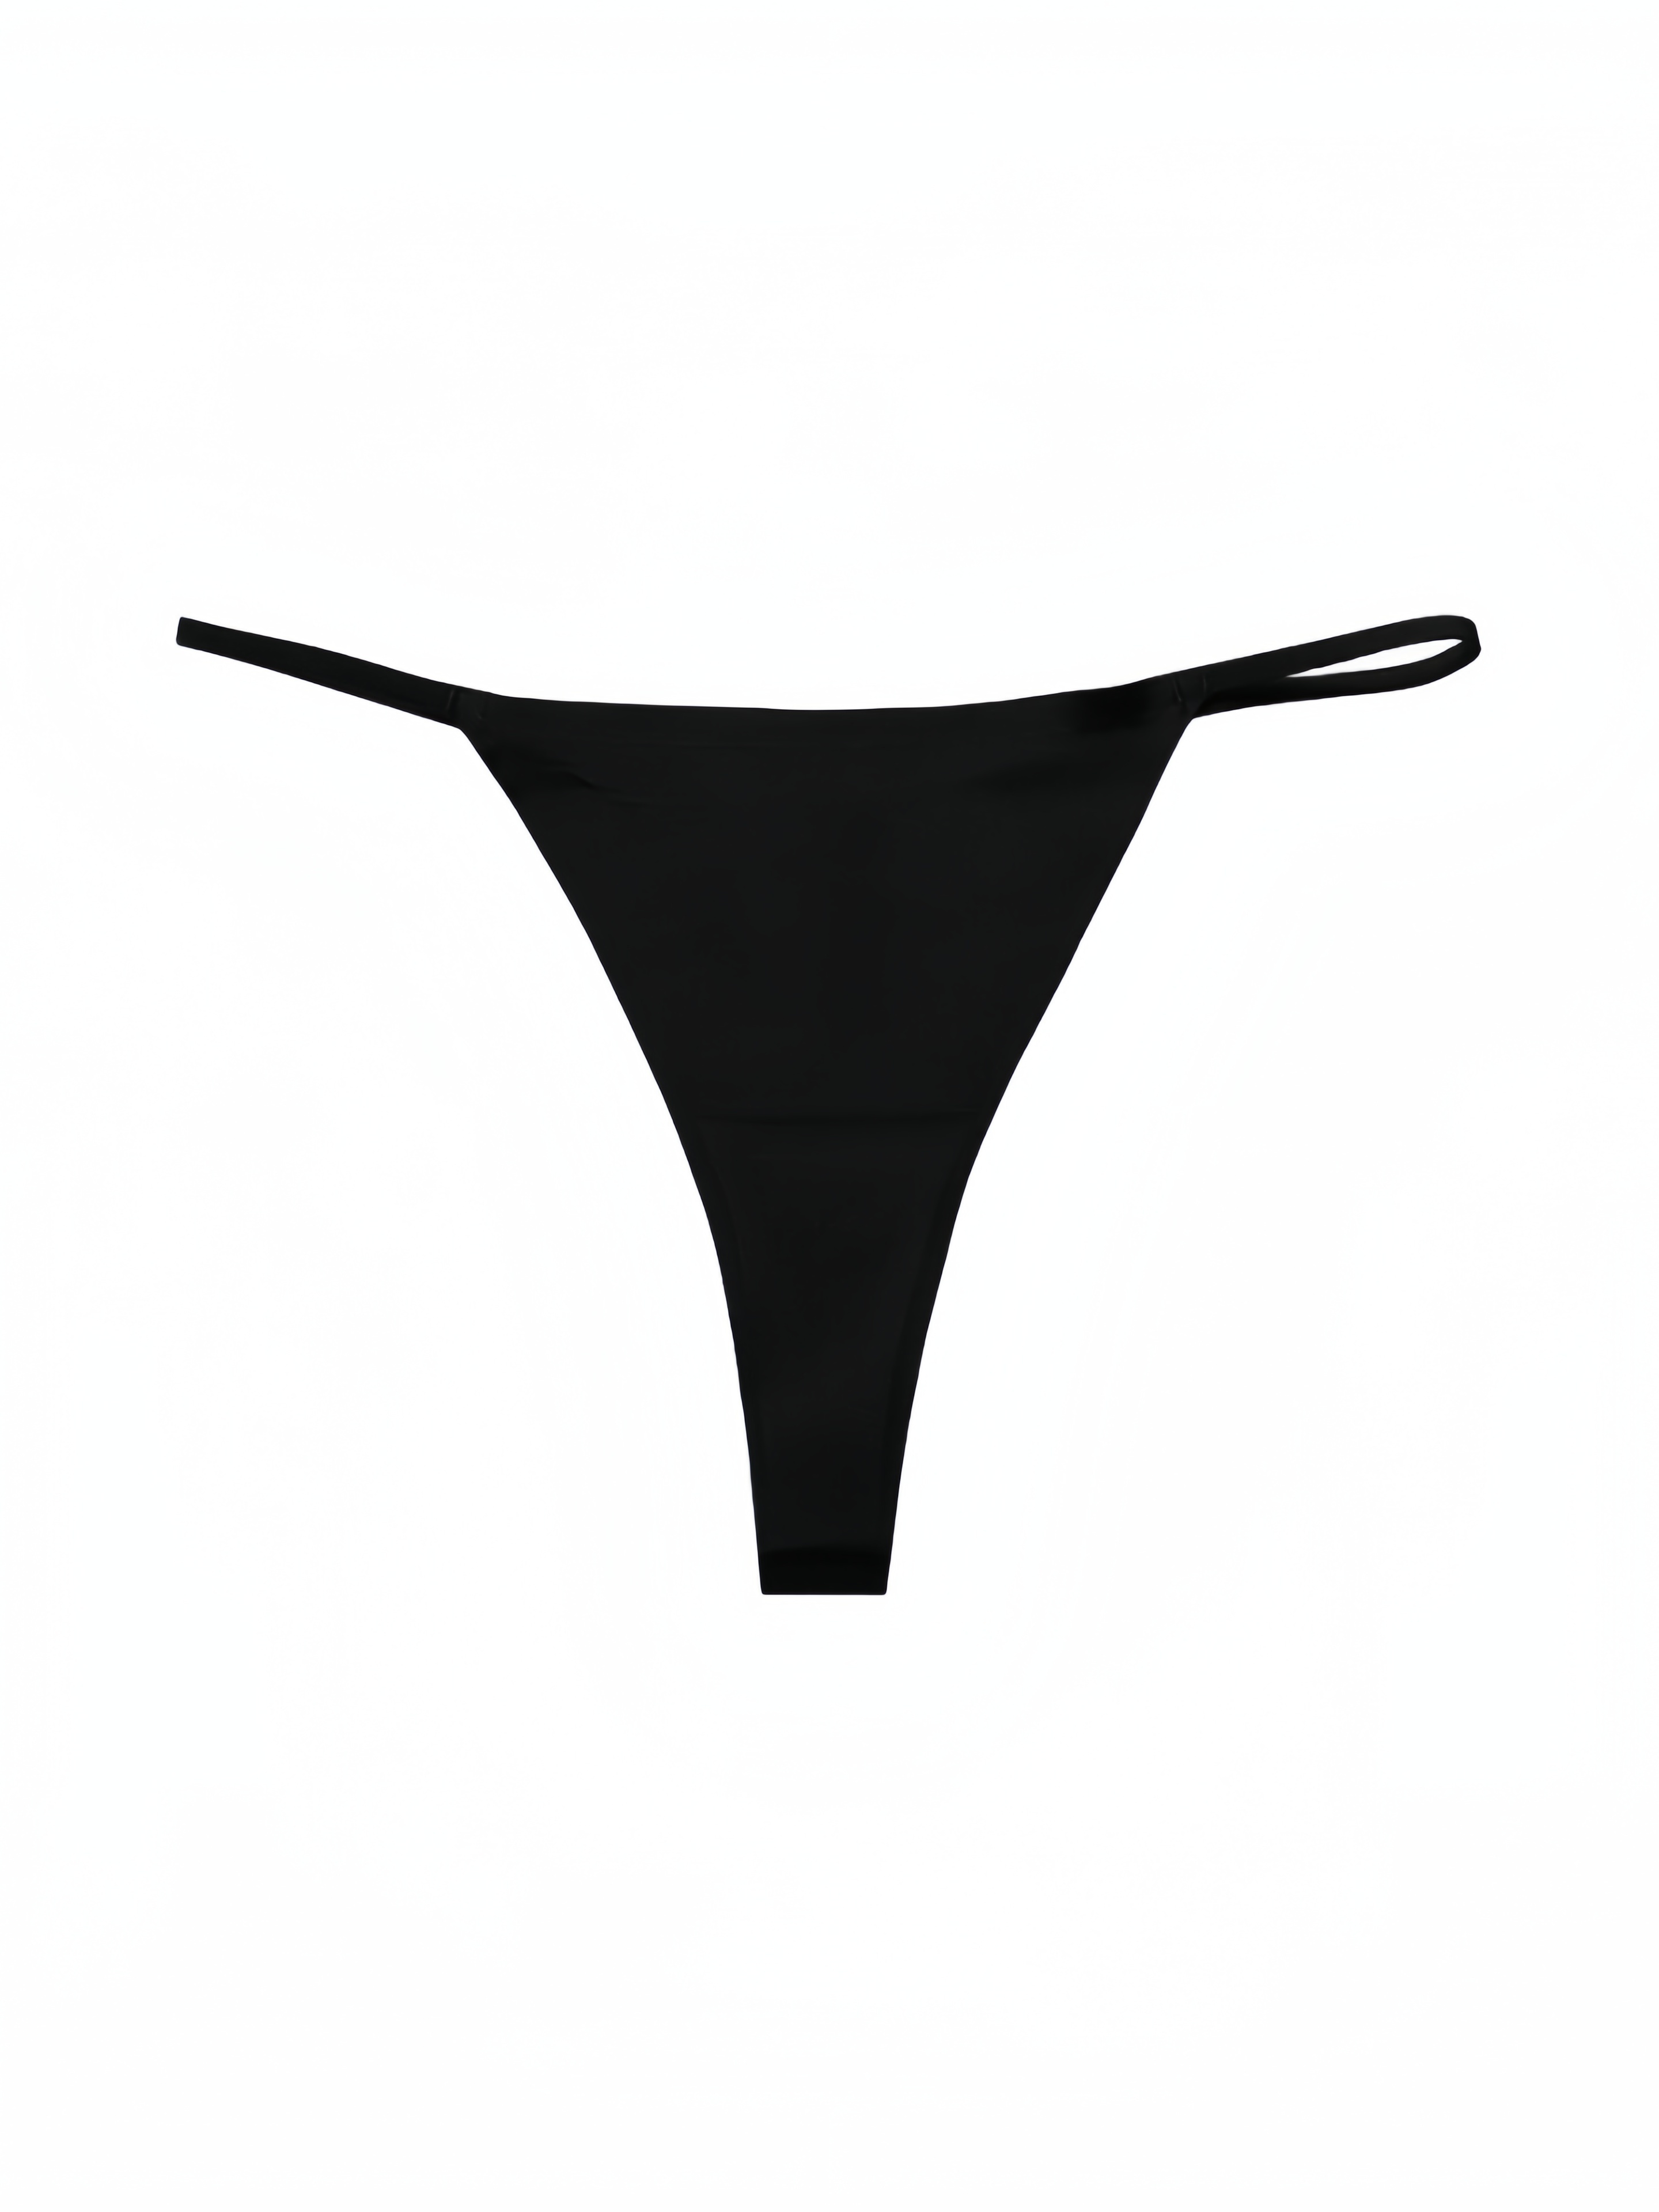 Men's Invisible Micro Lace C-String Thong Strapless Underwear Open Pouch  Panties